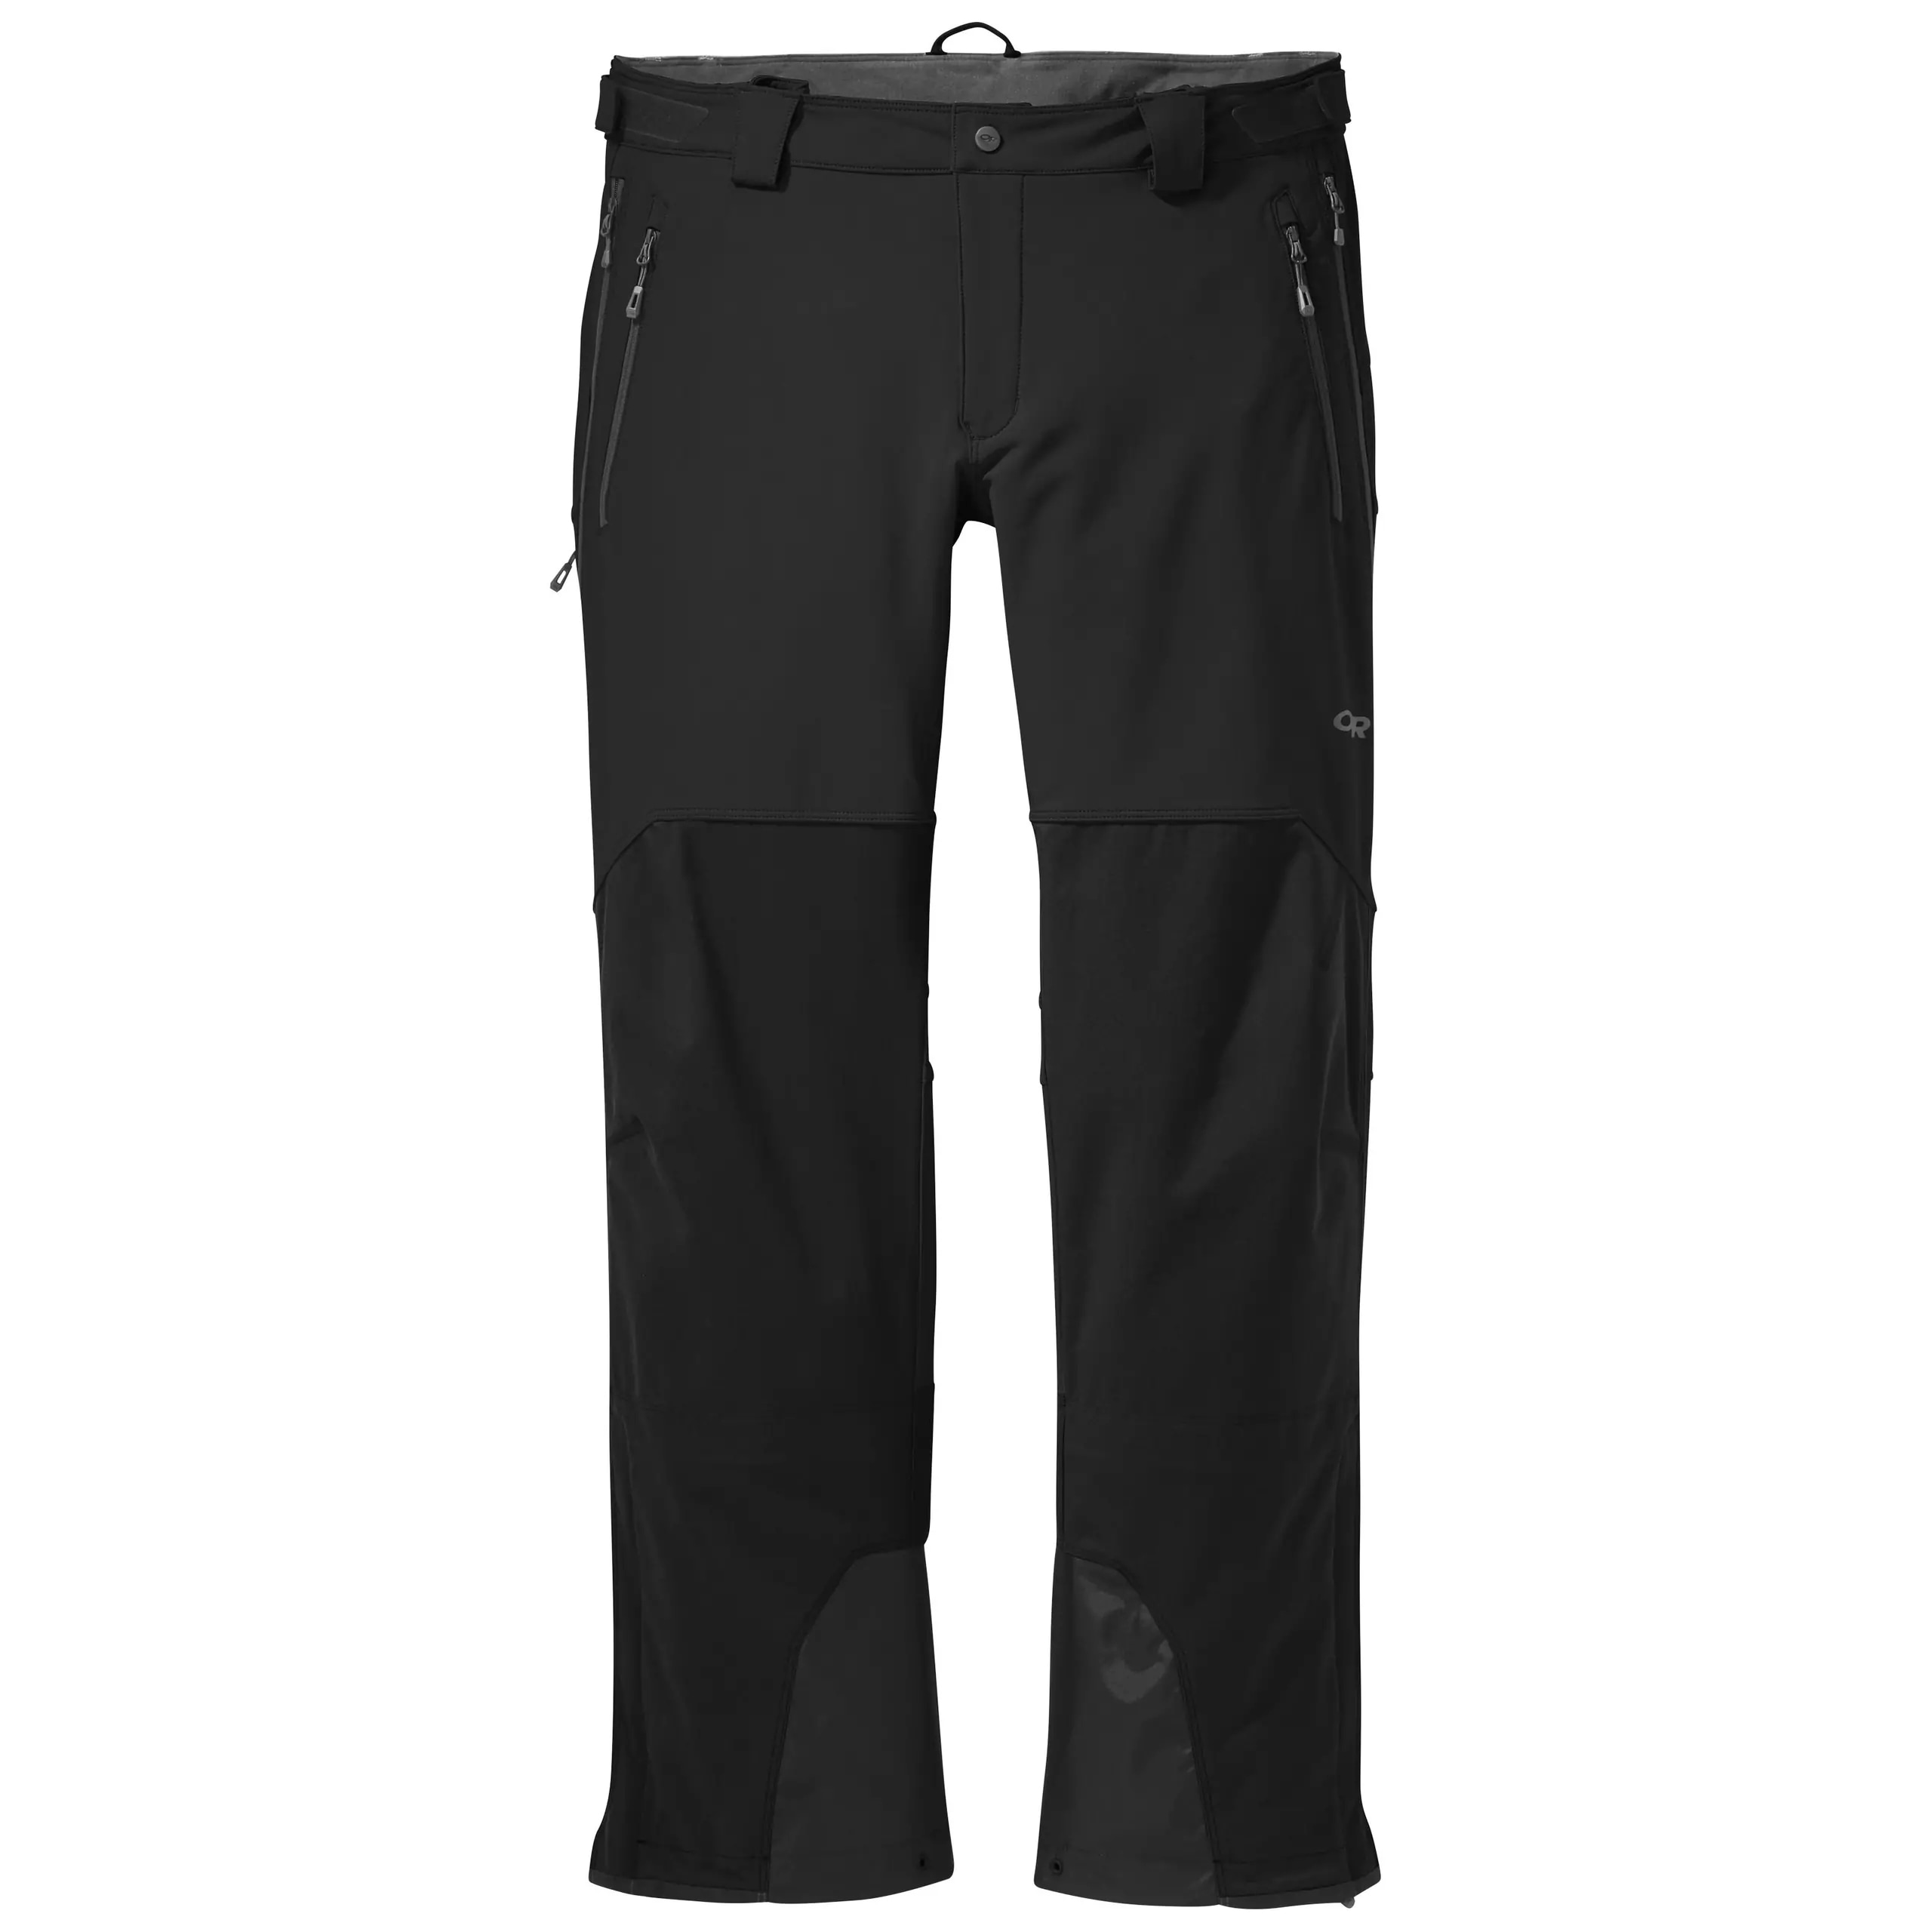 Outdoor Research Pant Trailbreaker II